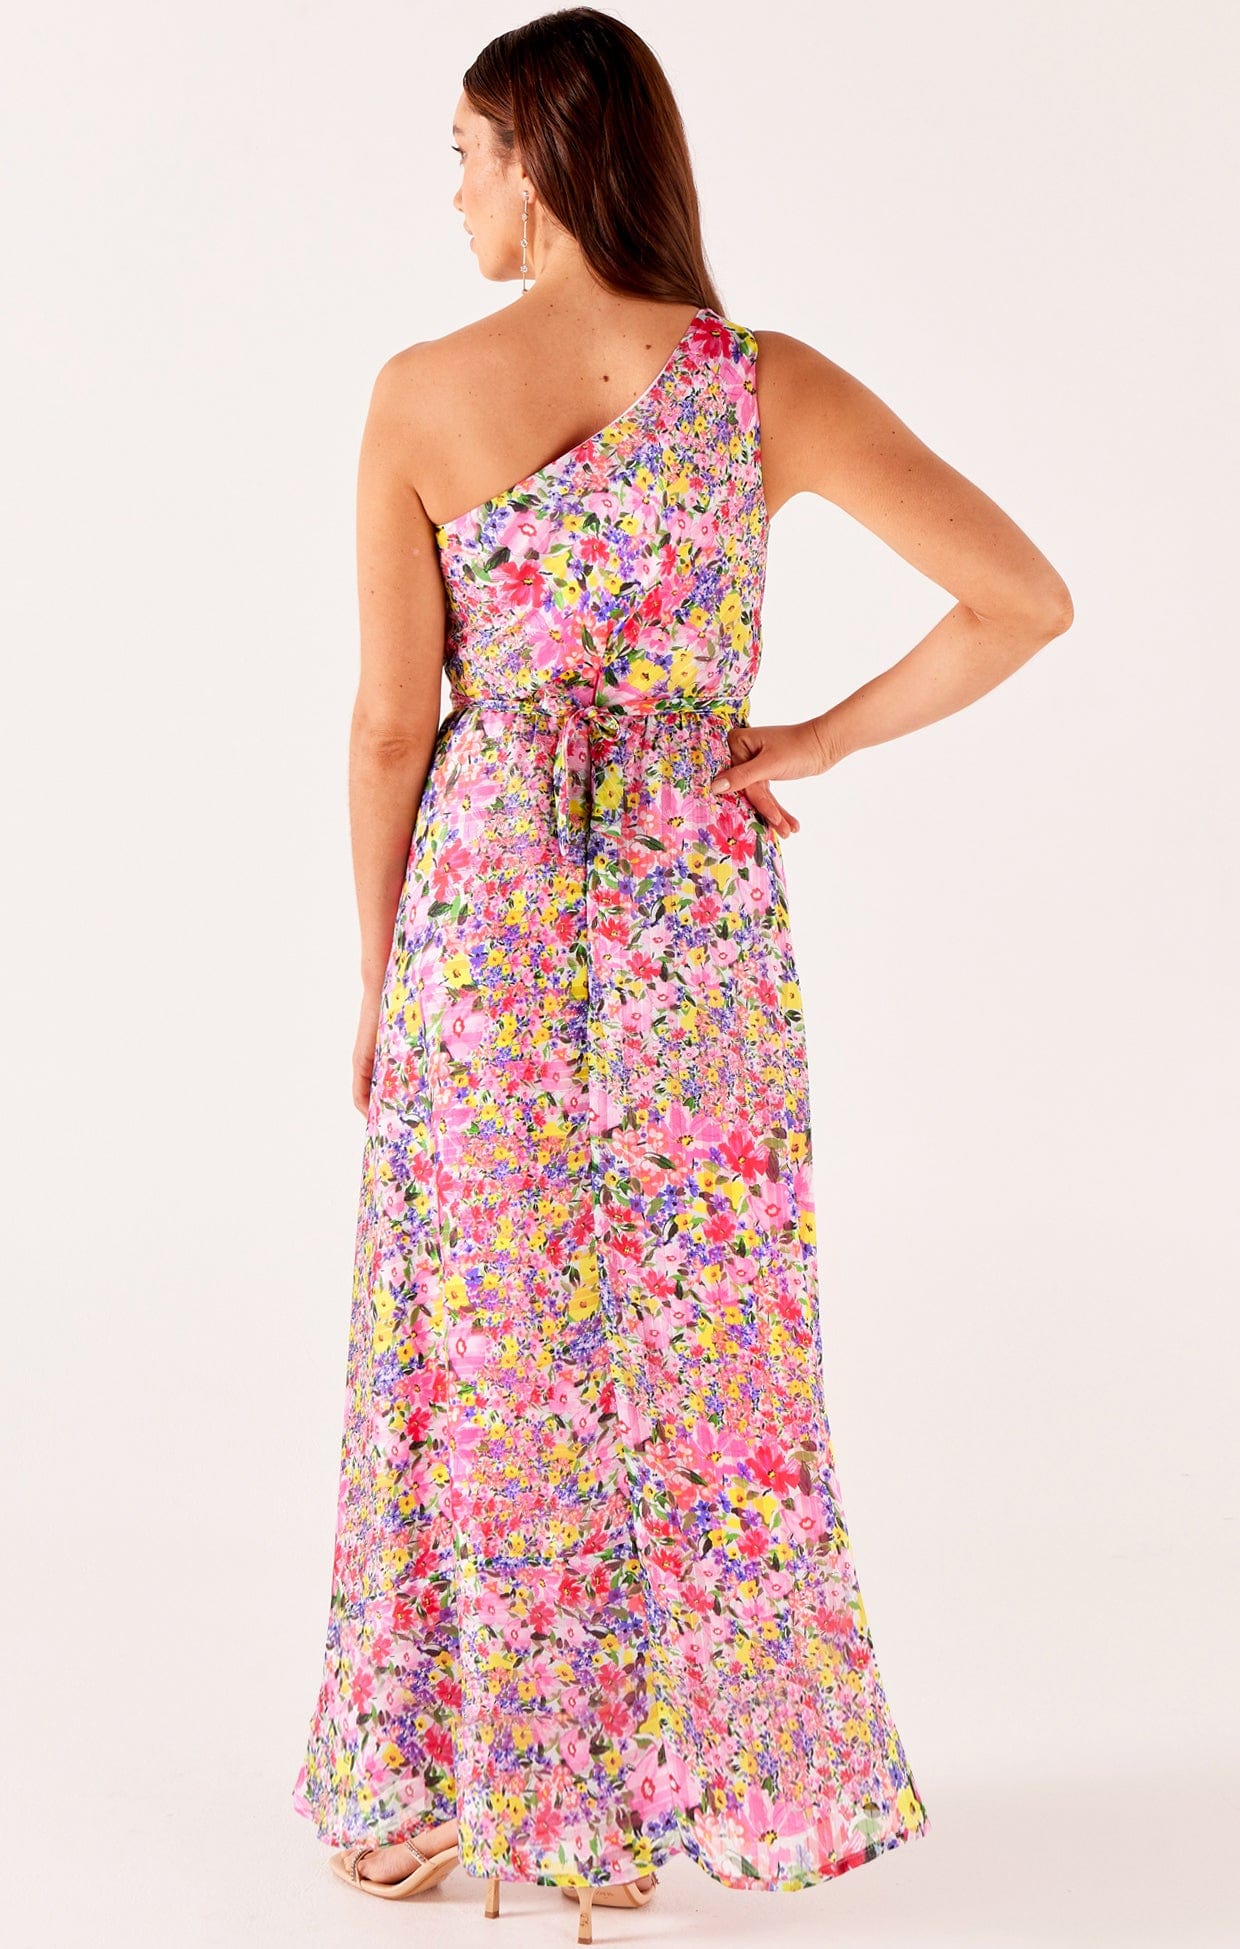 Dresses Events GARDEN IN THE SKY MAXI IN PINK MULTI FLORAL